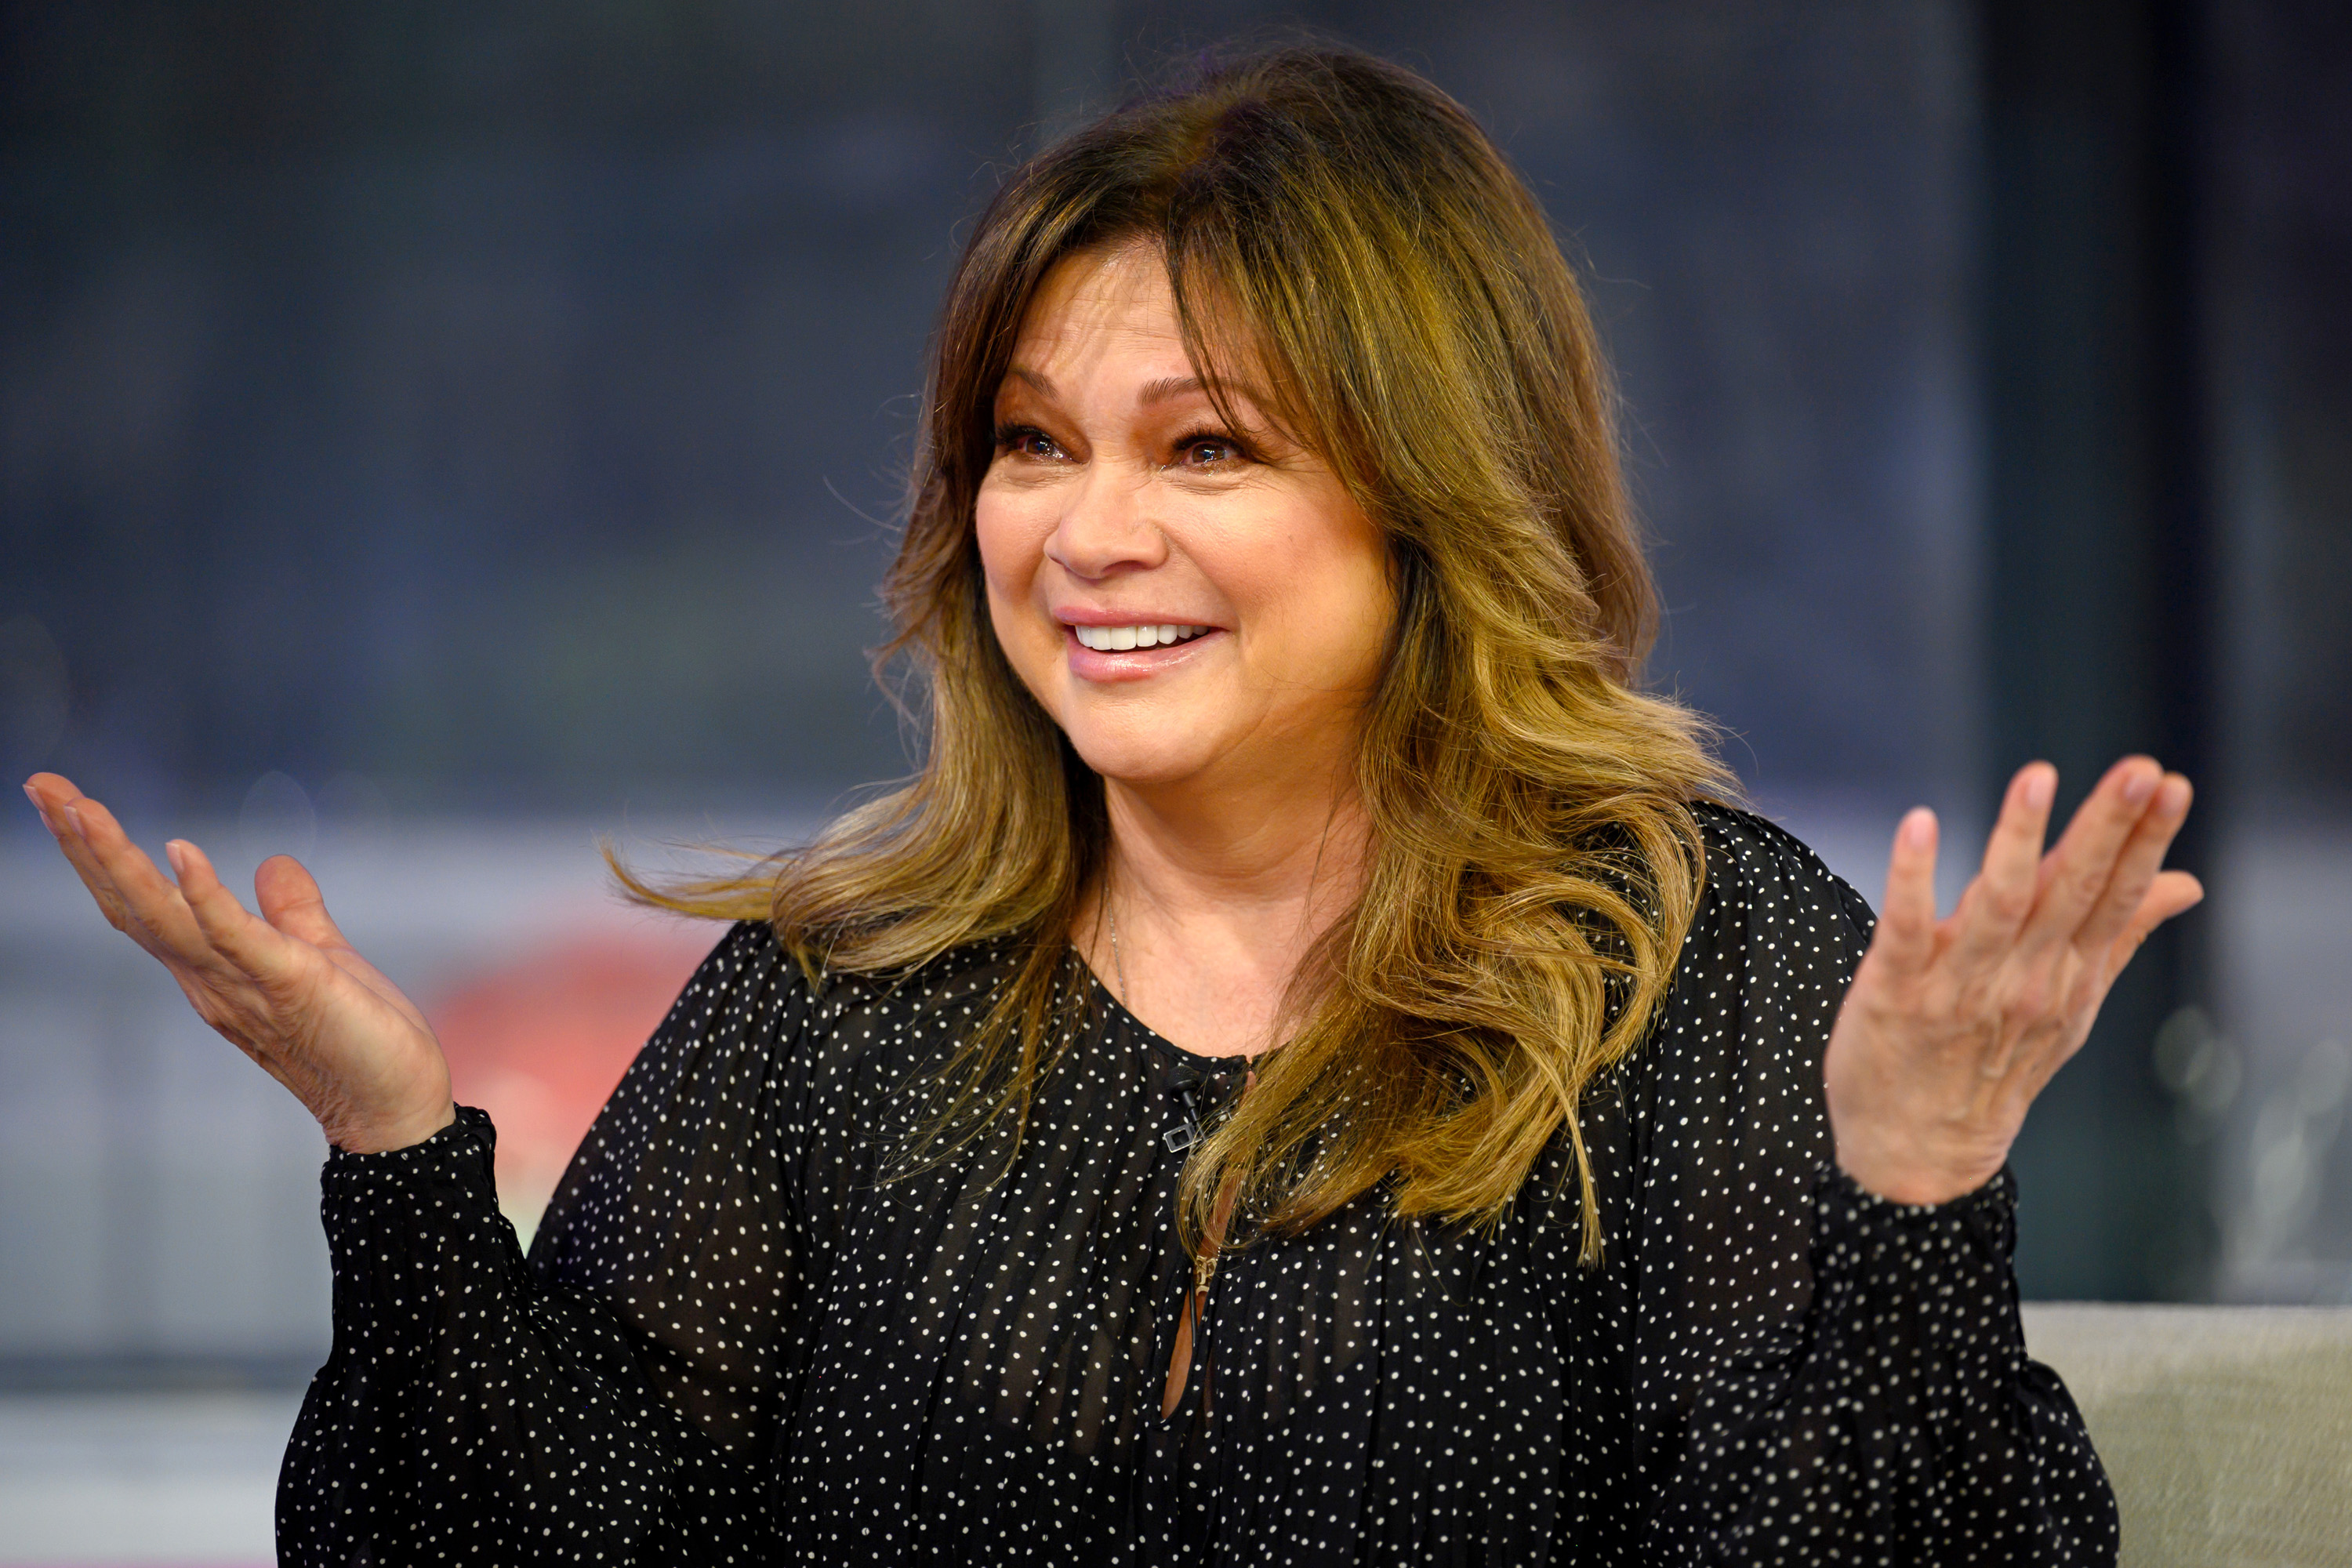 Valerie Bertinelli looks joyful on the "Today" show on June 9, 2022. | Source: Getty Images